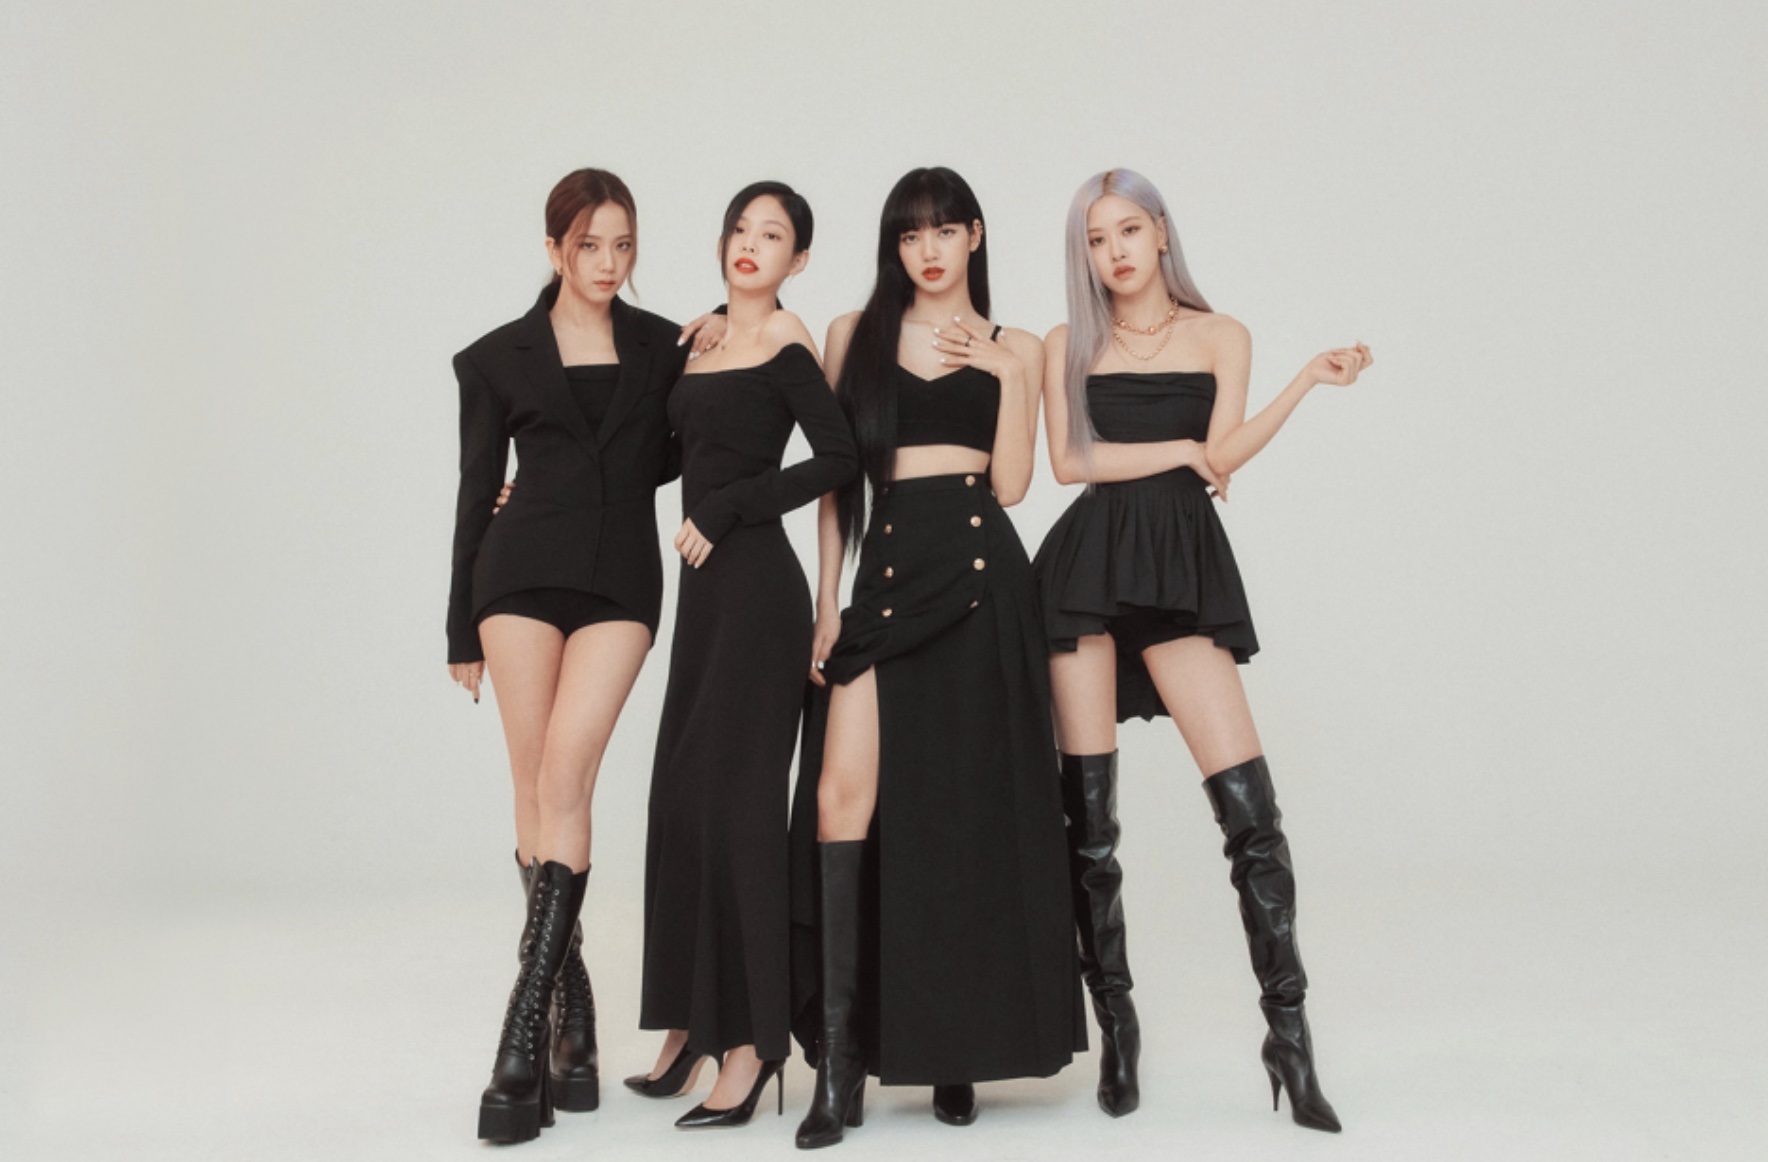 The iconic K-pop girl band BLACKPINK has announced that their new single is just around the corner. The group tweeted that the upcoming song “Pink Venom” from their new album Born Pink will drop on August 19 at midnight EST. The song will drop a month before the release of their upcoming new album BORN PINK, which will be released on September 16. Fans can pre-save their new album on Spotify and Apple Music.